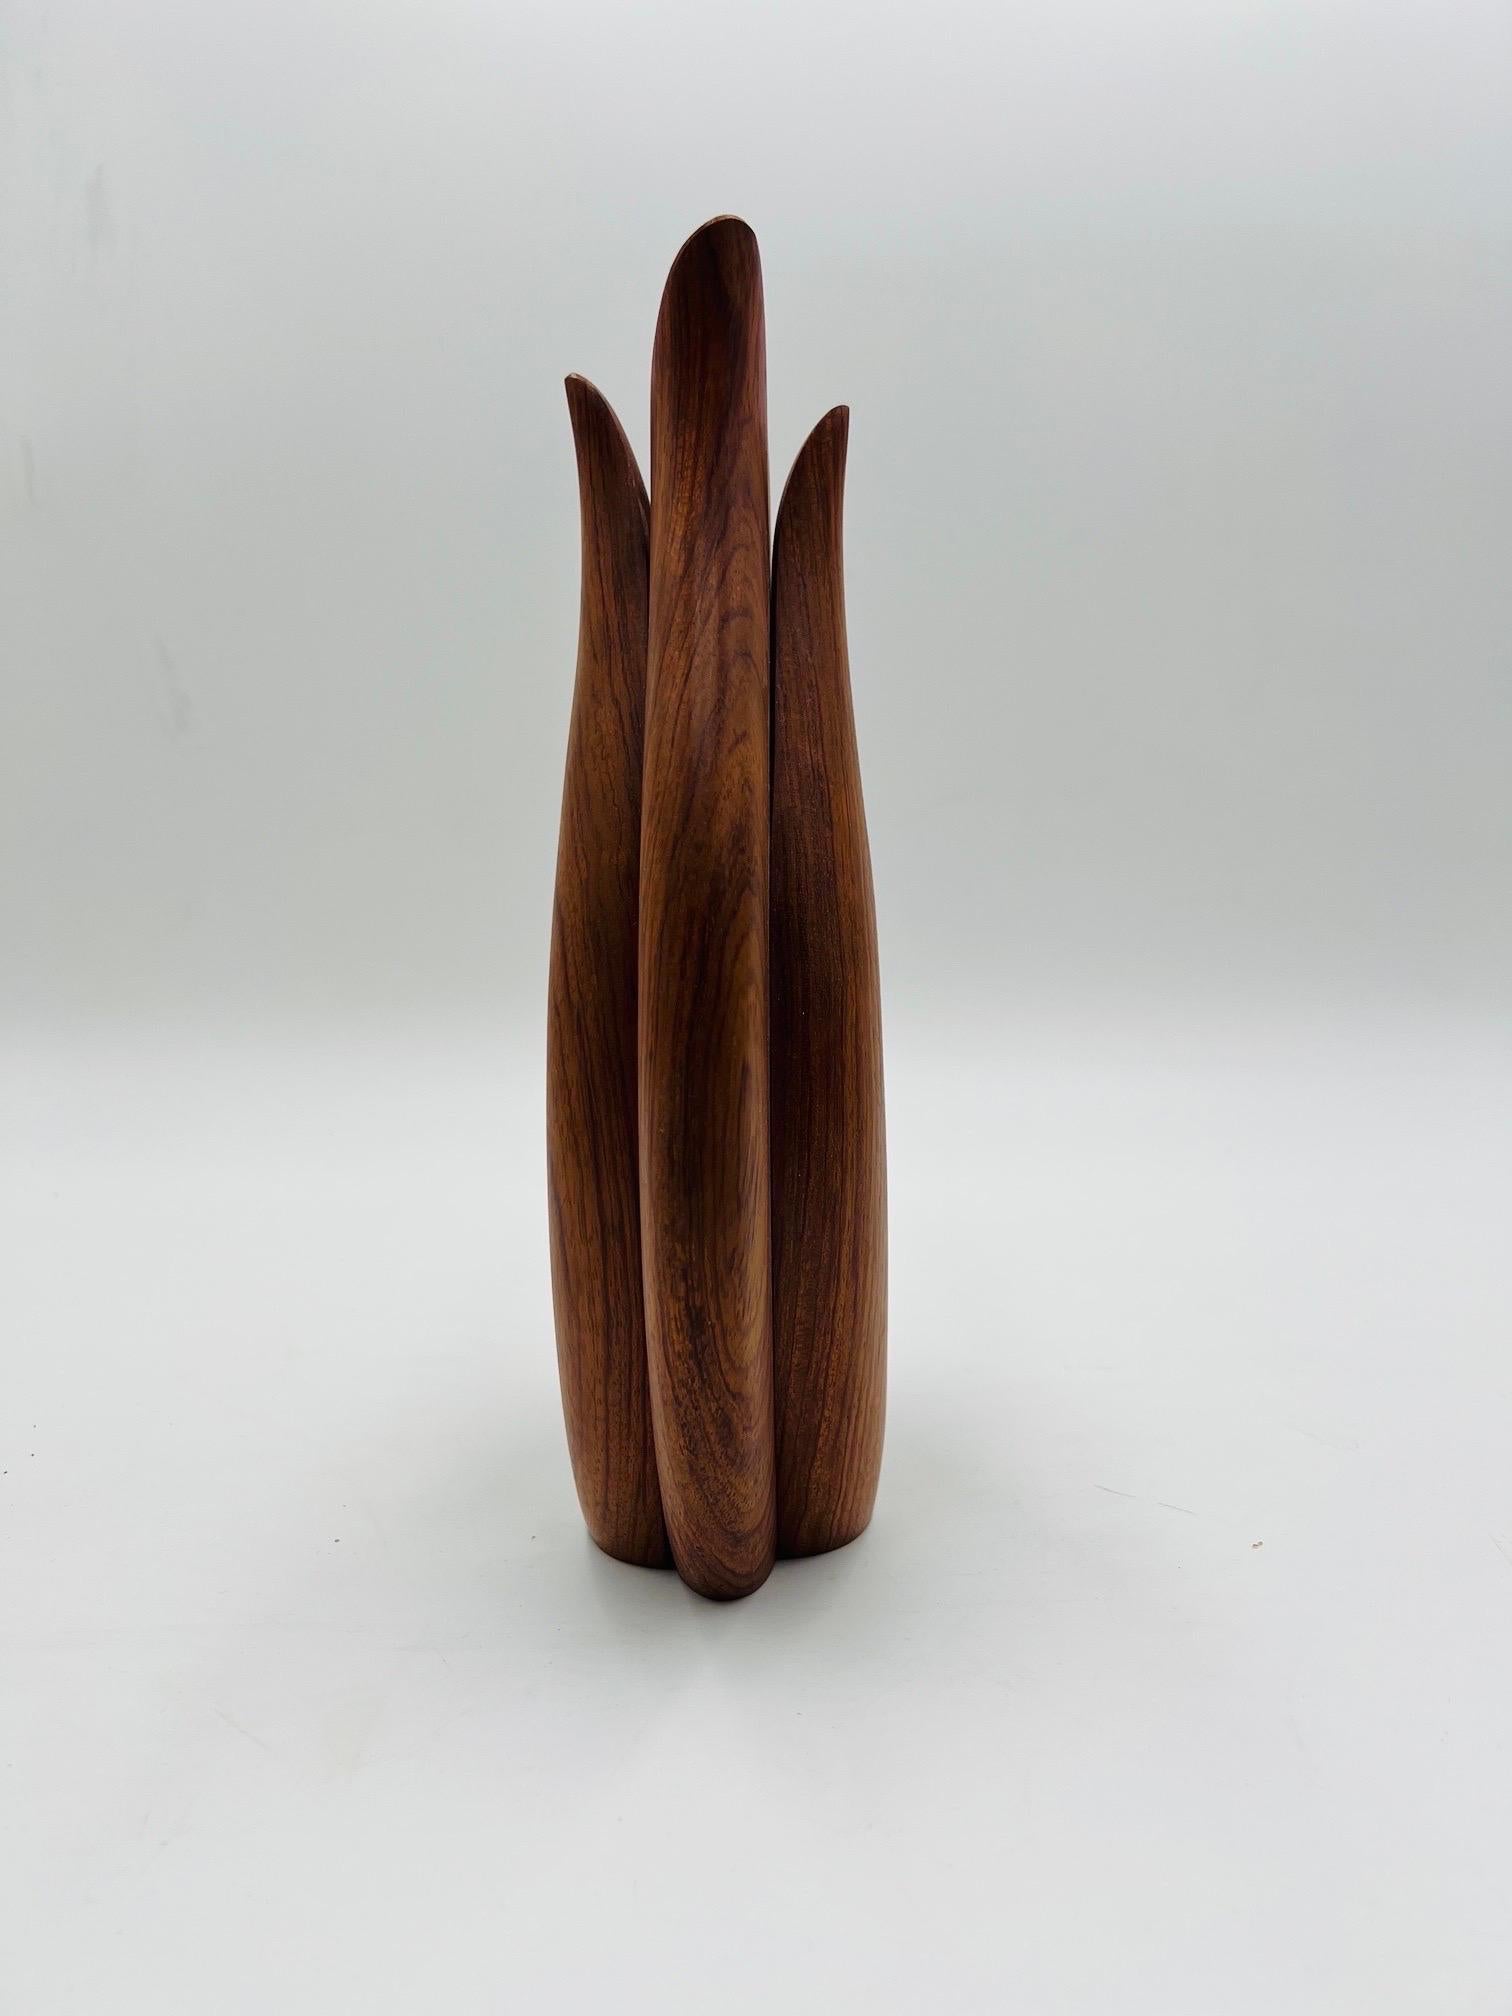 Unknown Vintage Modern Style Studio Quality Vase Featured in Teak Wood For Sale